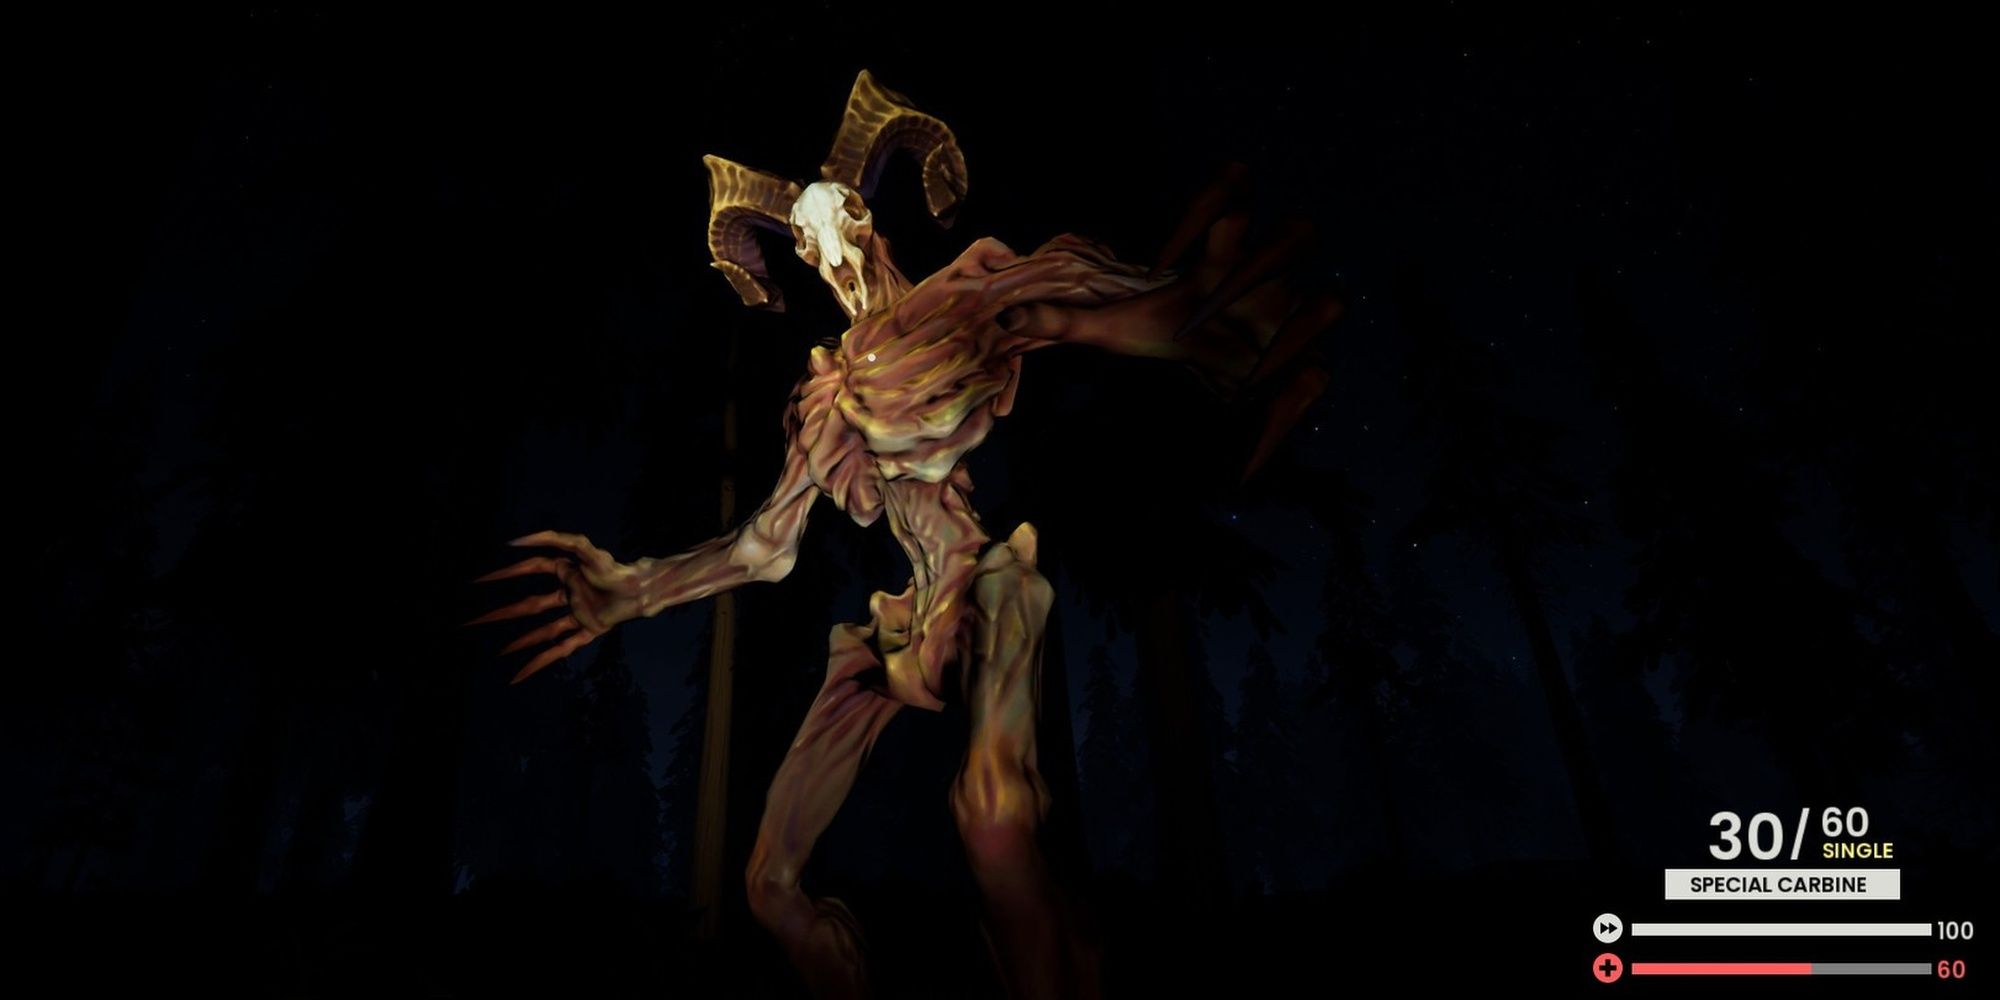 A Day Out: A Hunter Encountering A Wendigo In The Darkness